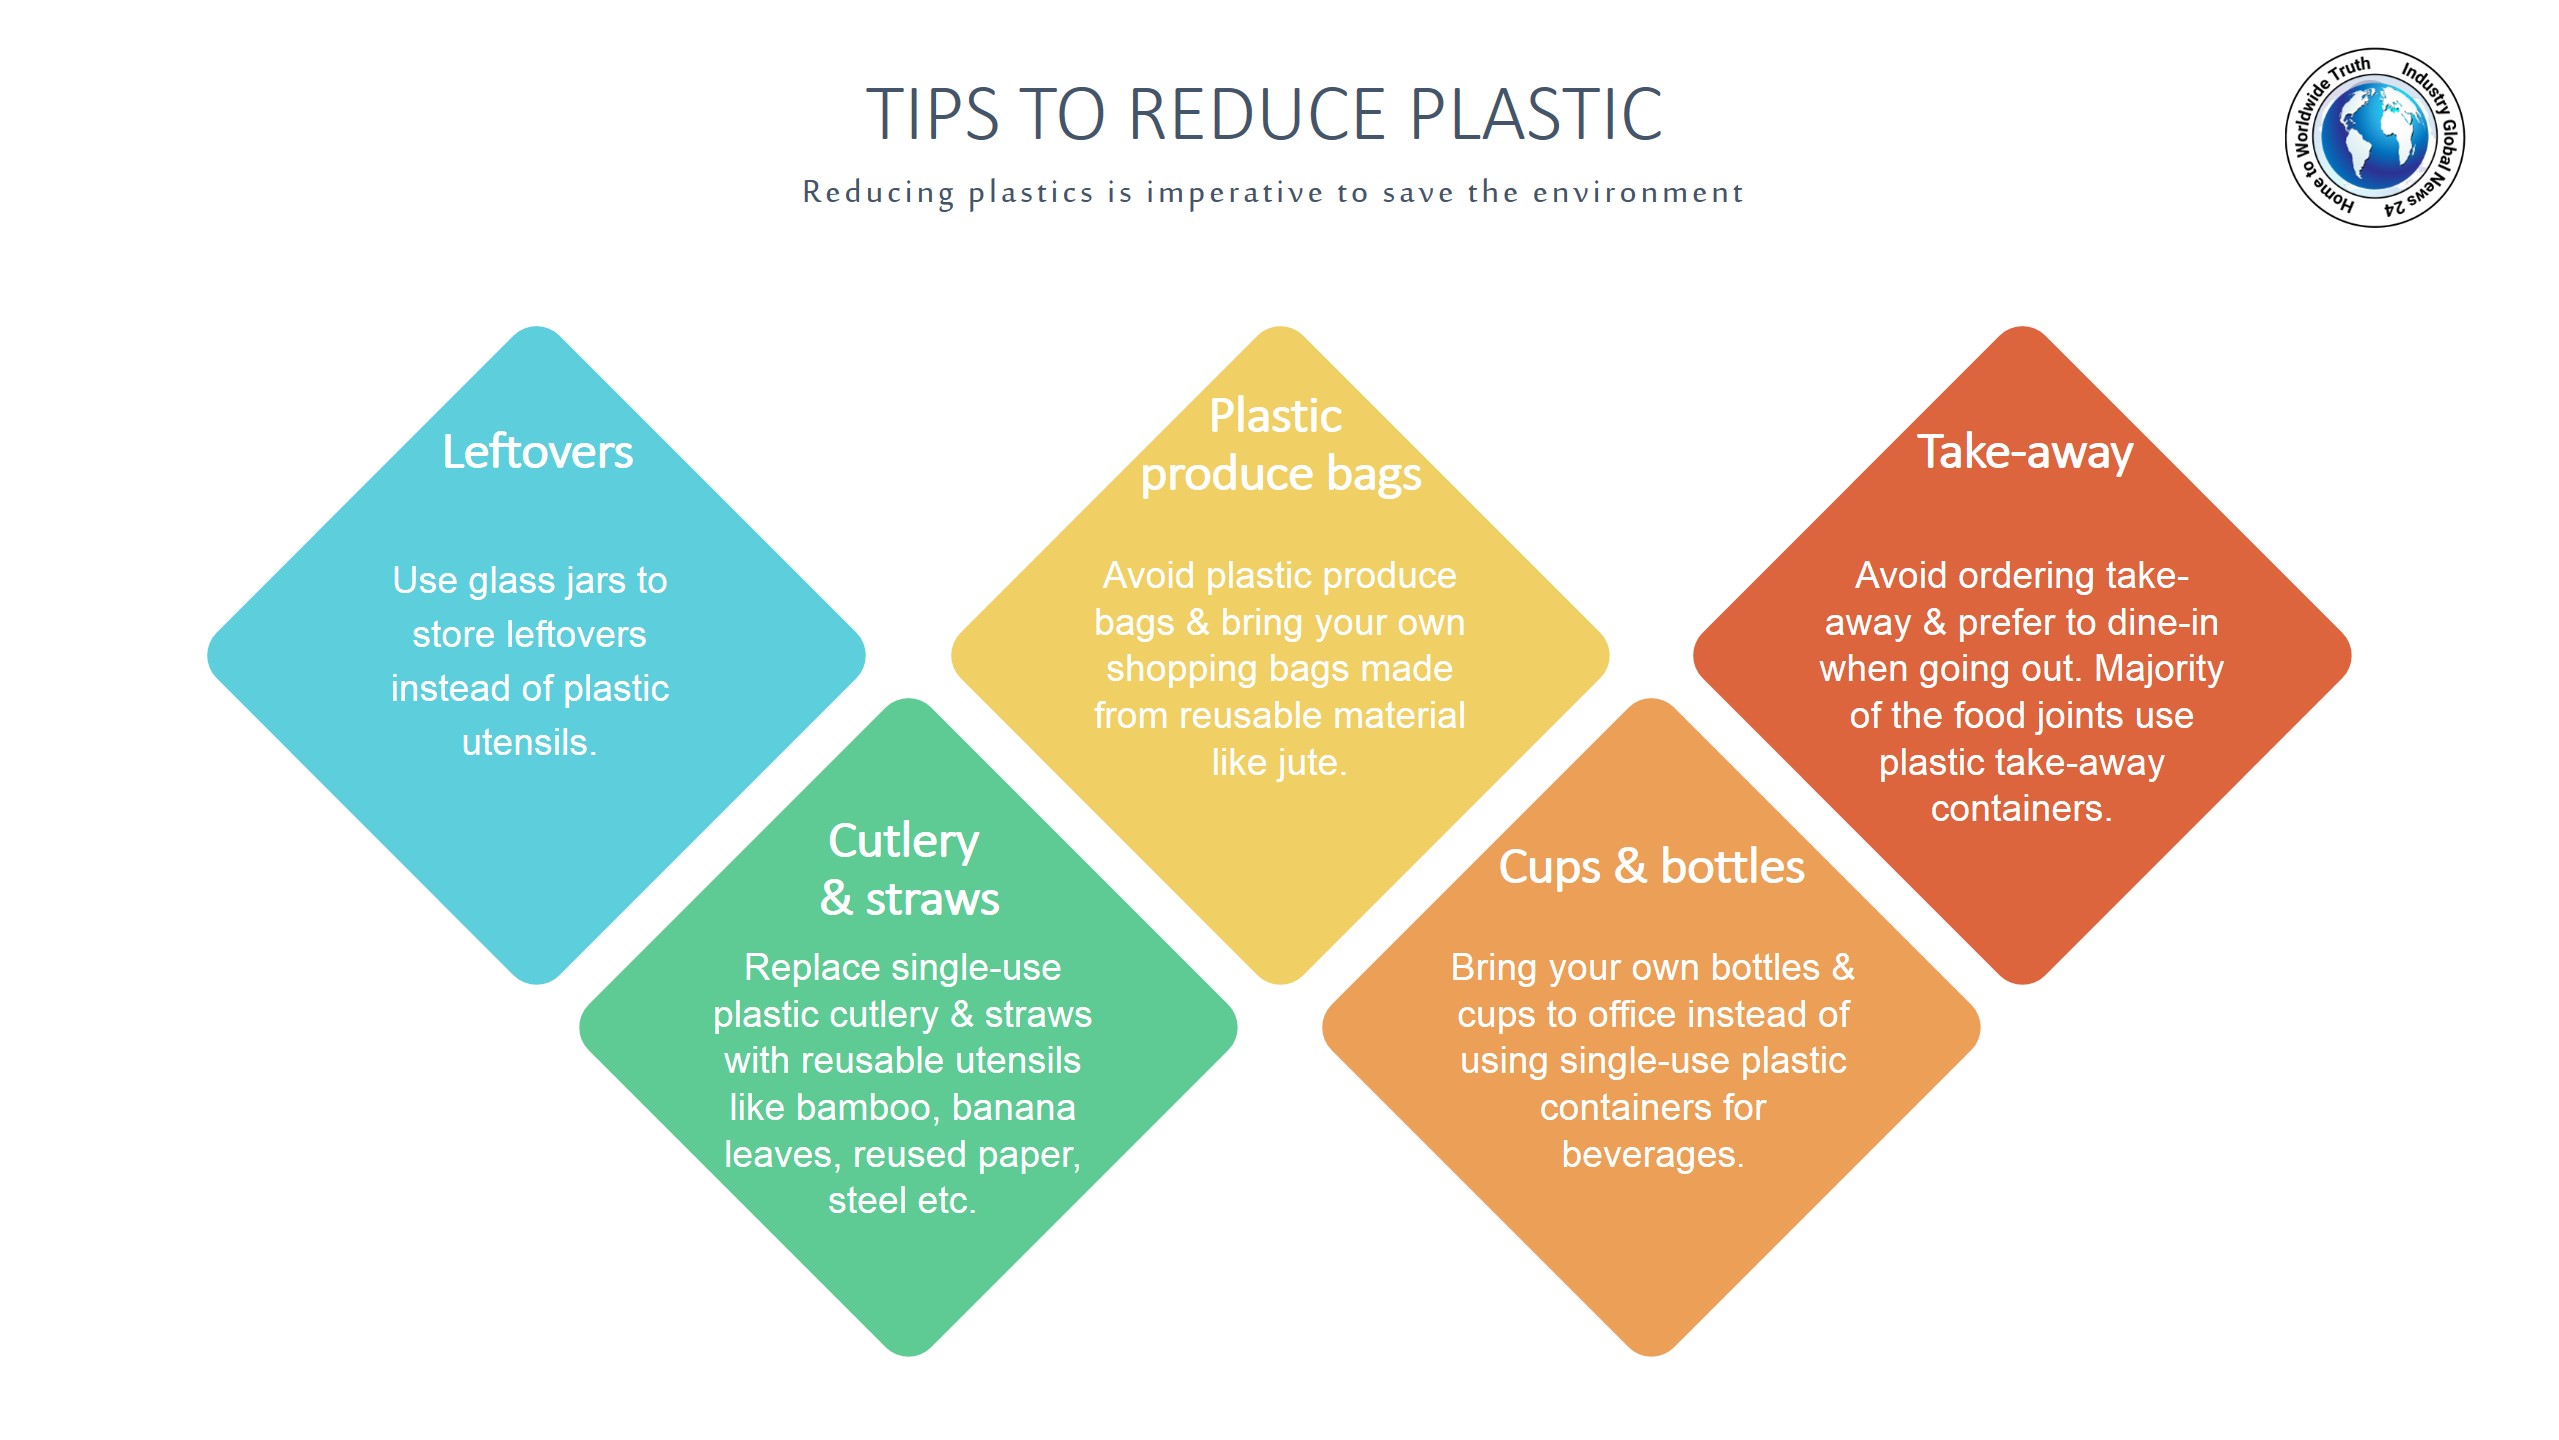 Tips to reduce plastic